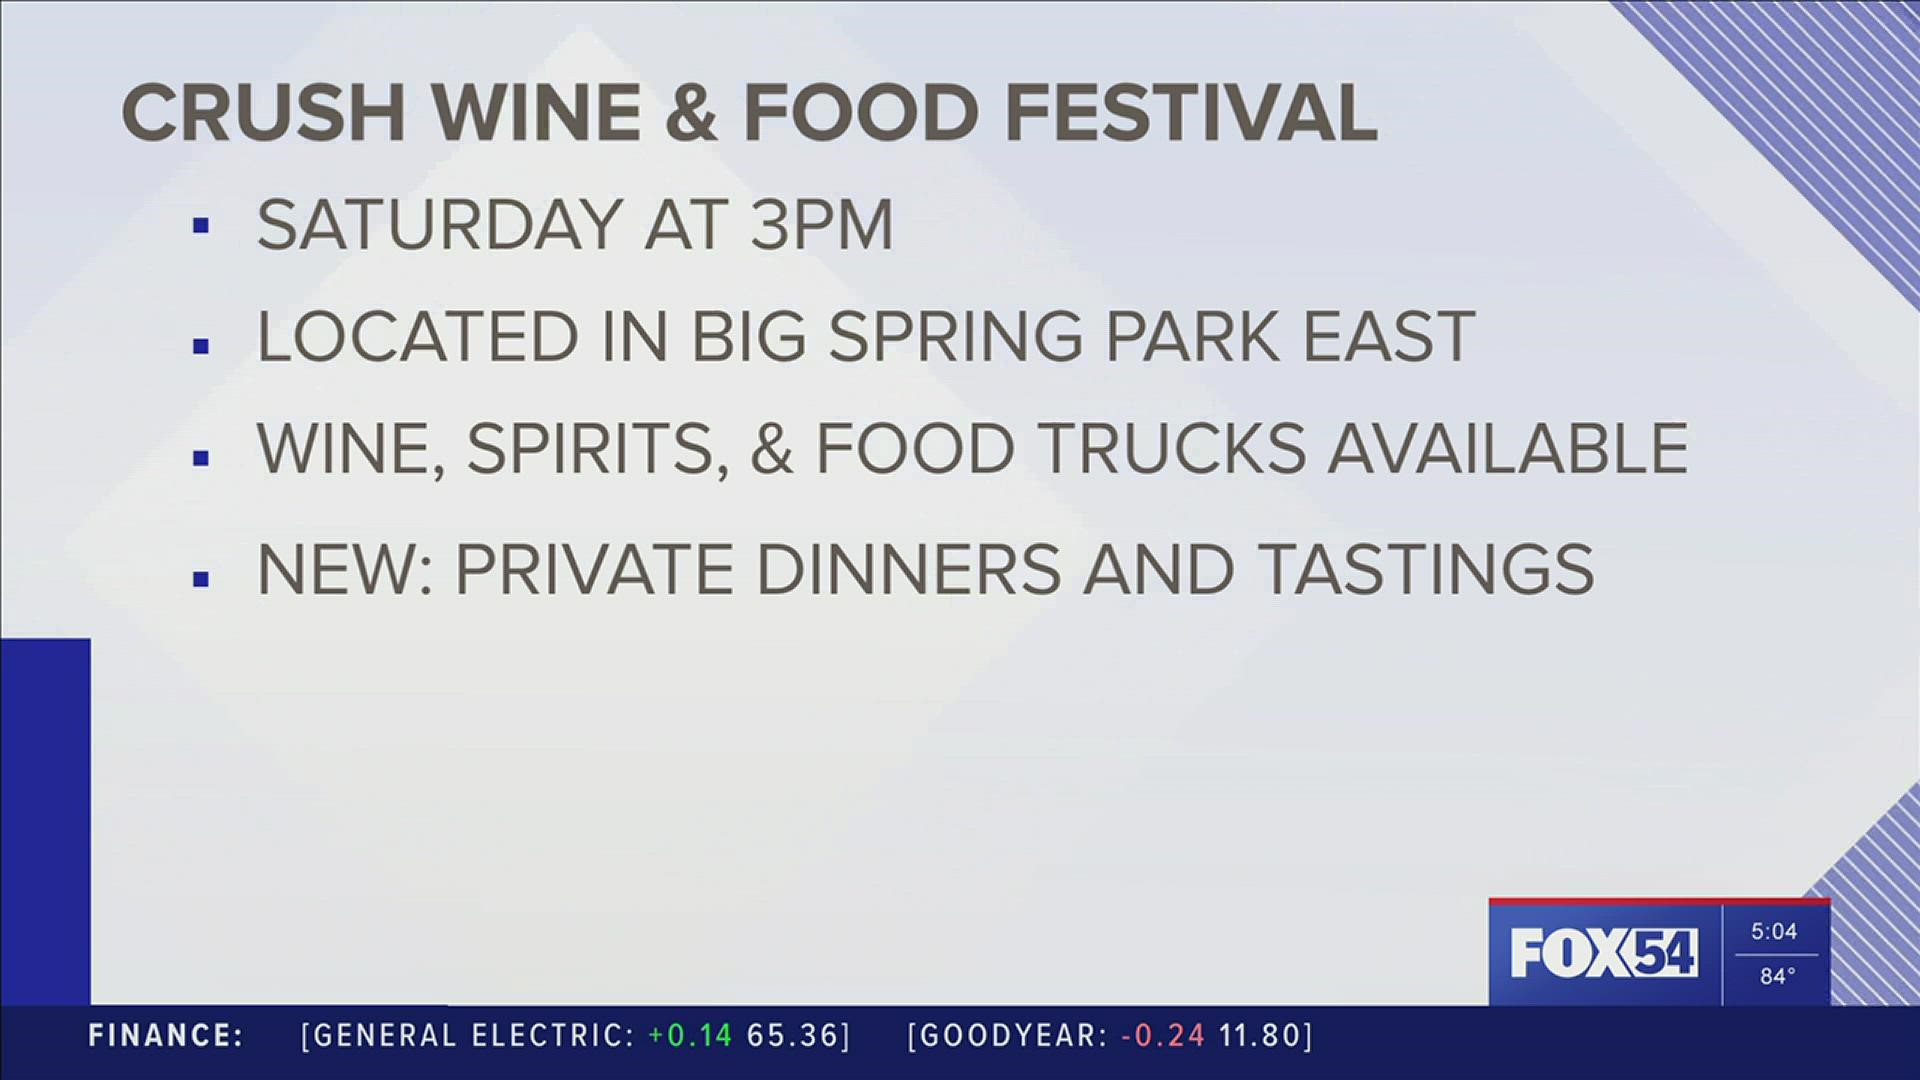 The eighth annual Crush Wine and Food Festival is this Saturday starting at 3pm.